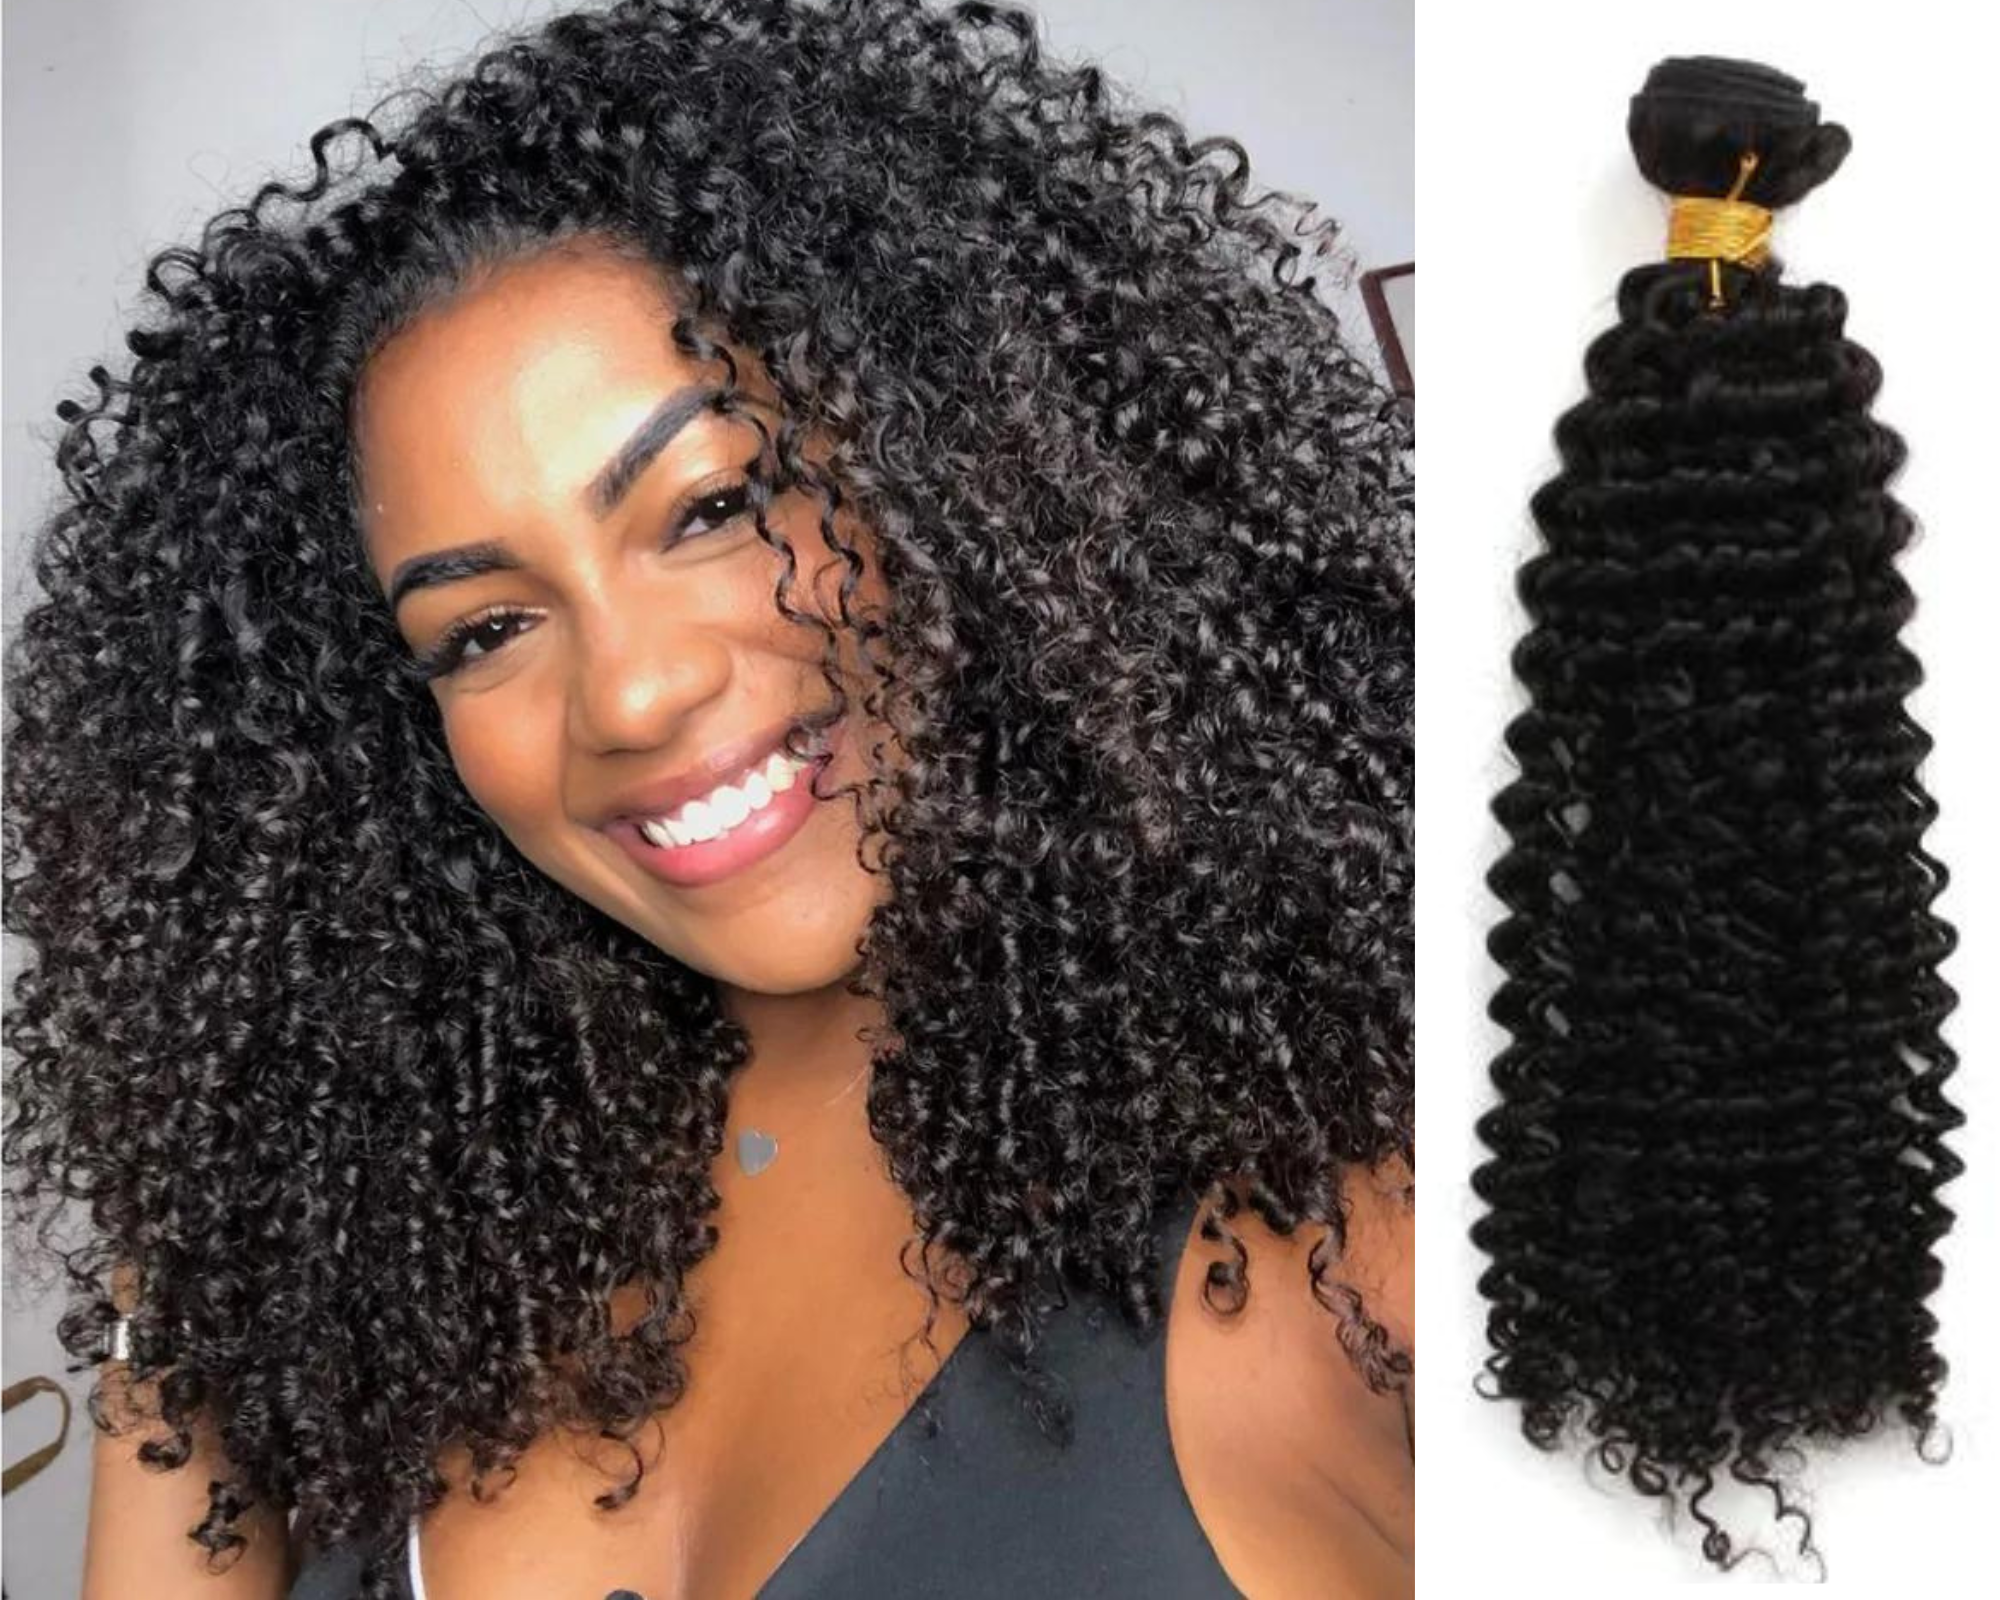 1 x Jerry Curly Human Hair Extension 100g